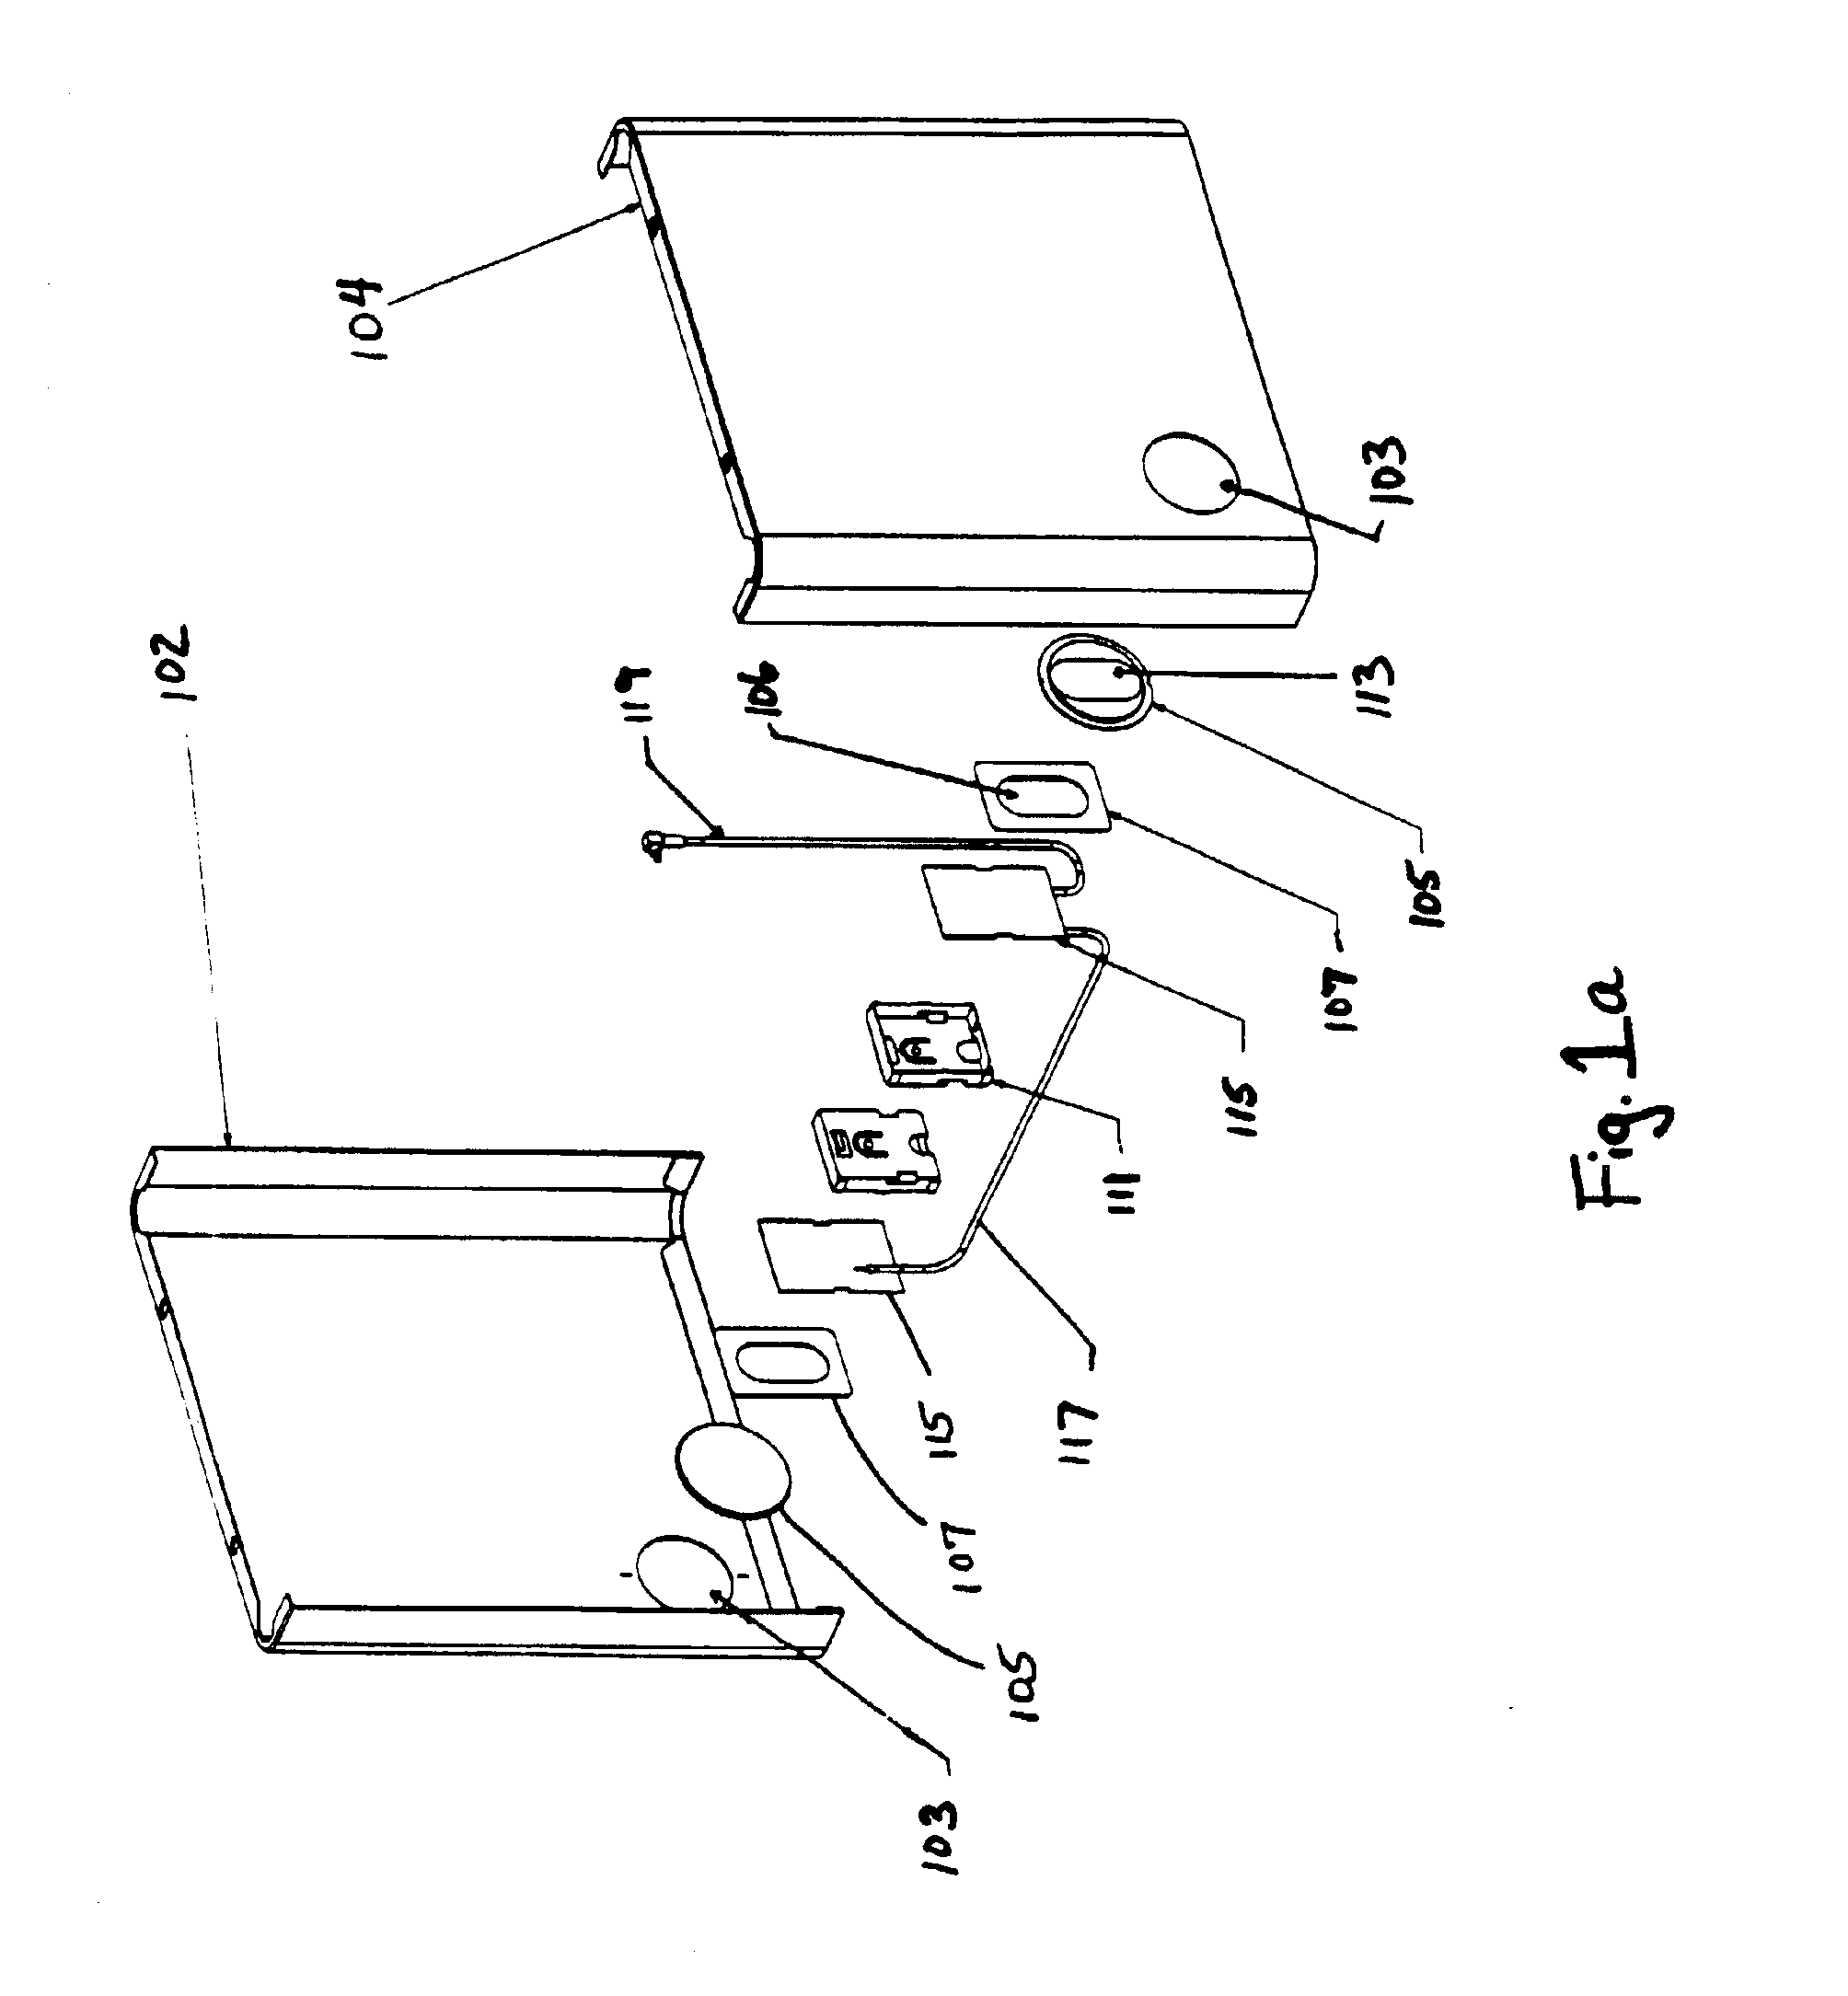 Recessed aperture-coupled patch antenna with multiple dielectrics for wireless applications